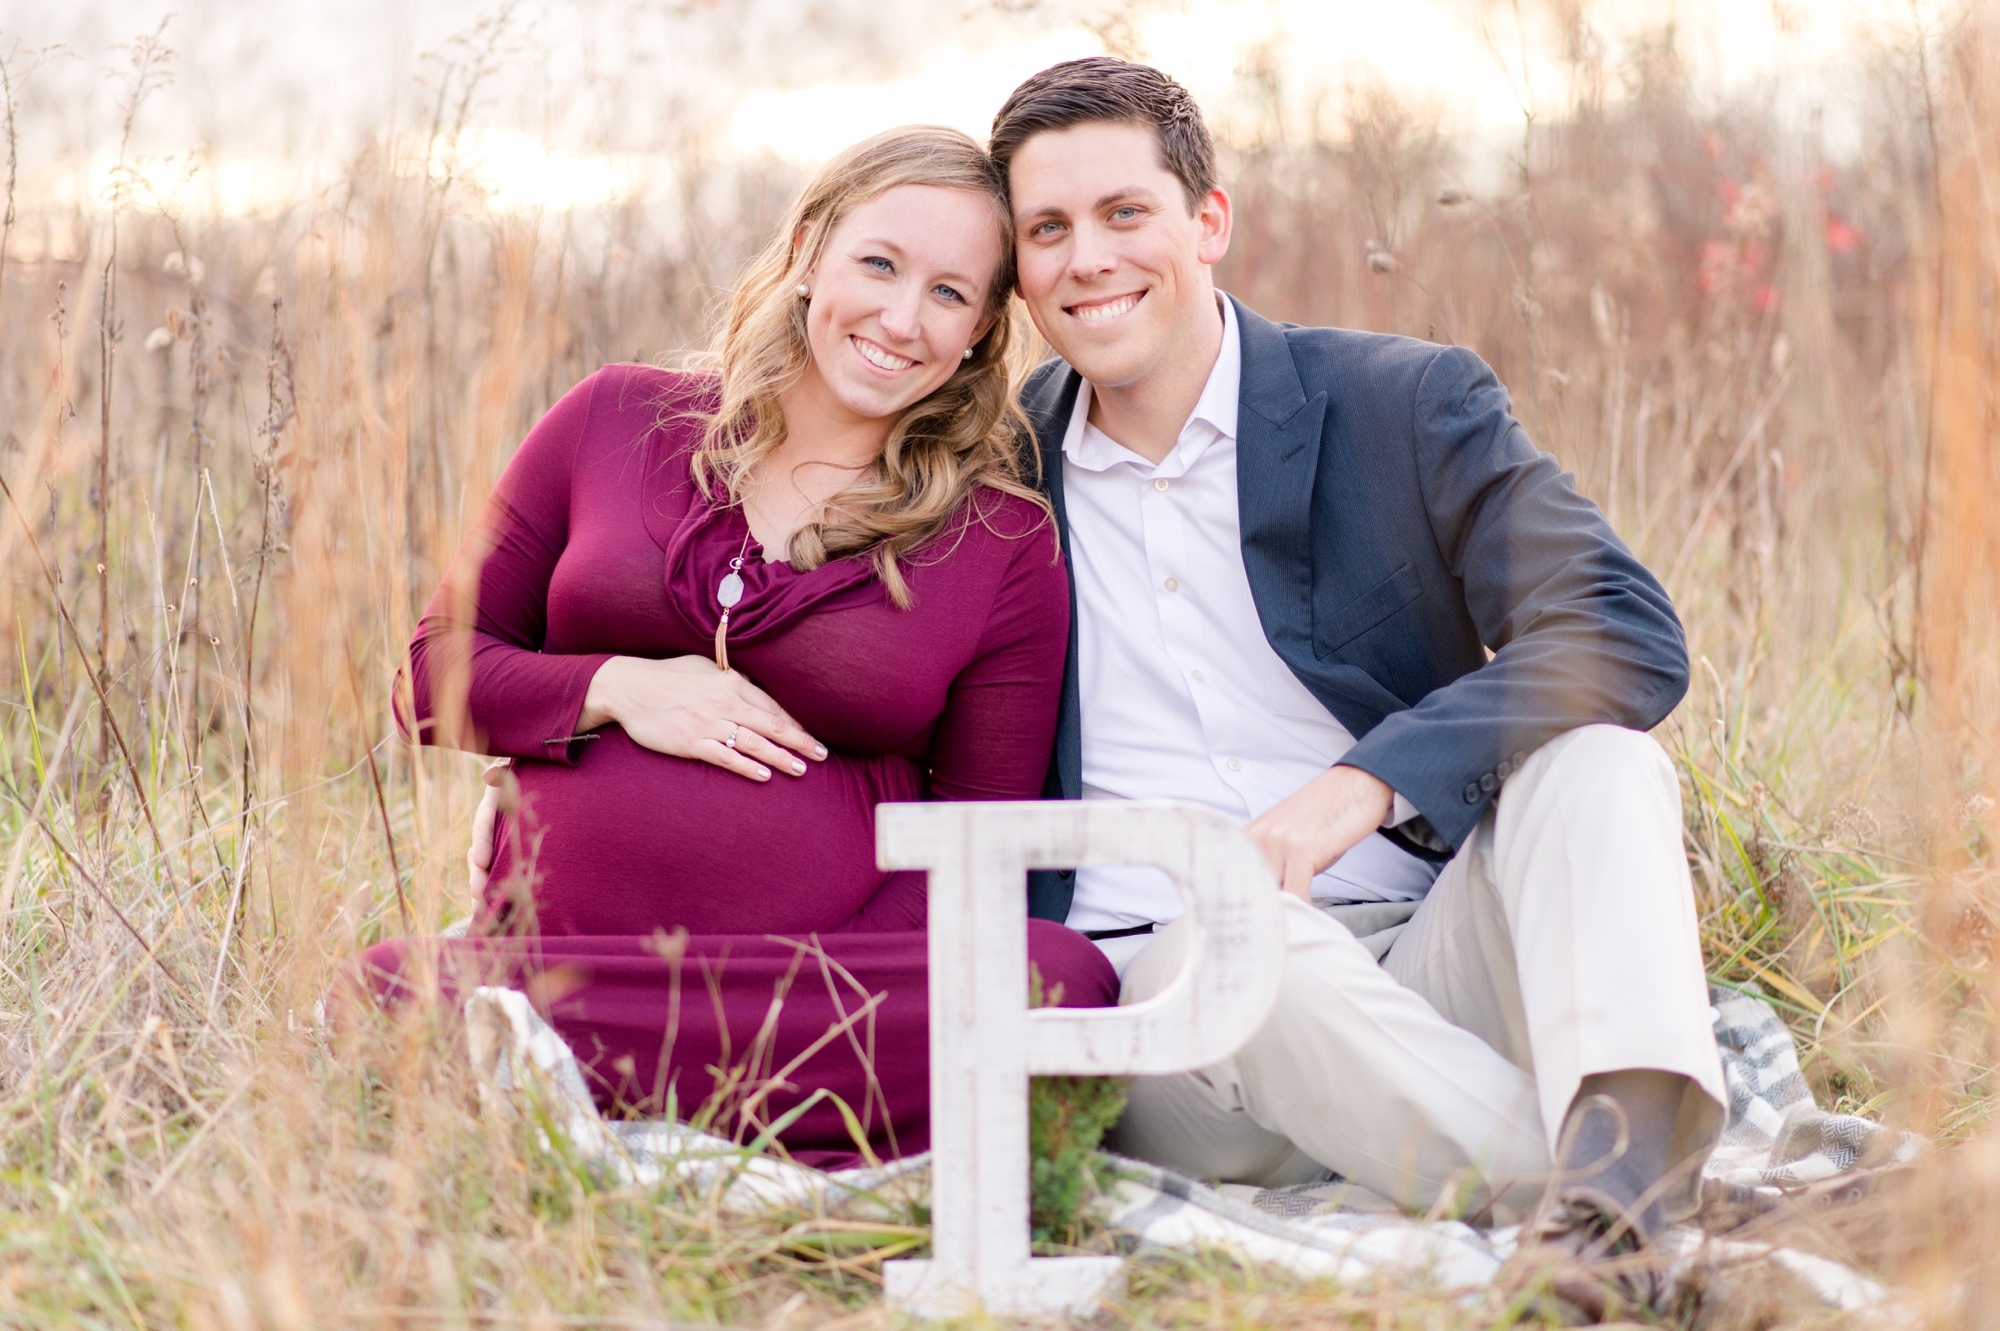 AG and Kevin Maternity-233_anna grace photography baltimore maryland maternity photographer cromwell valley park photo.jpg